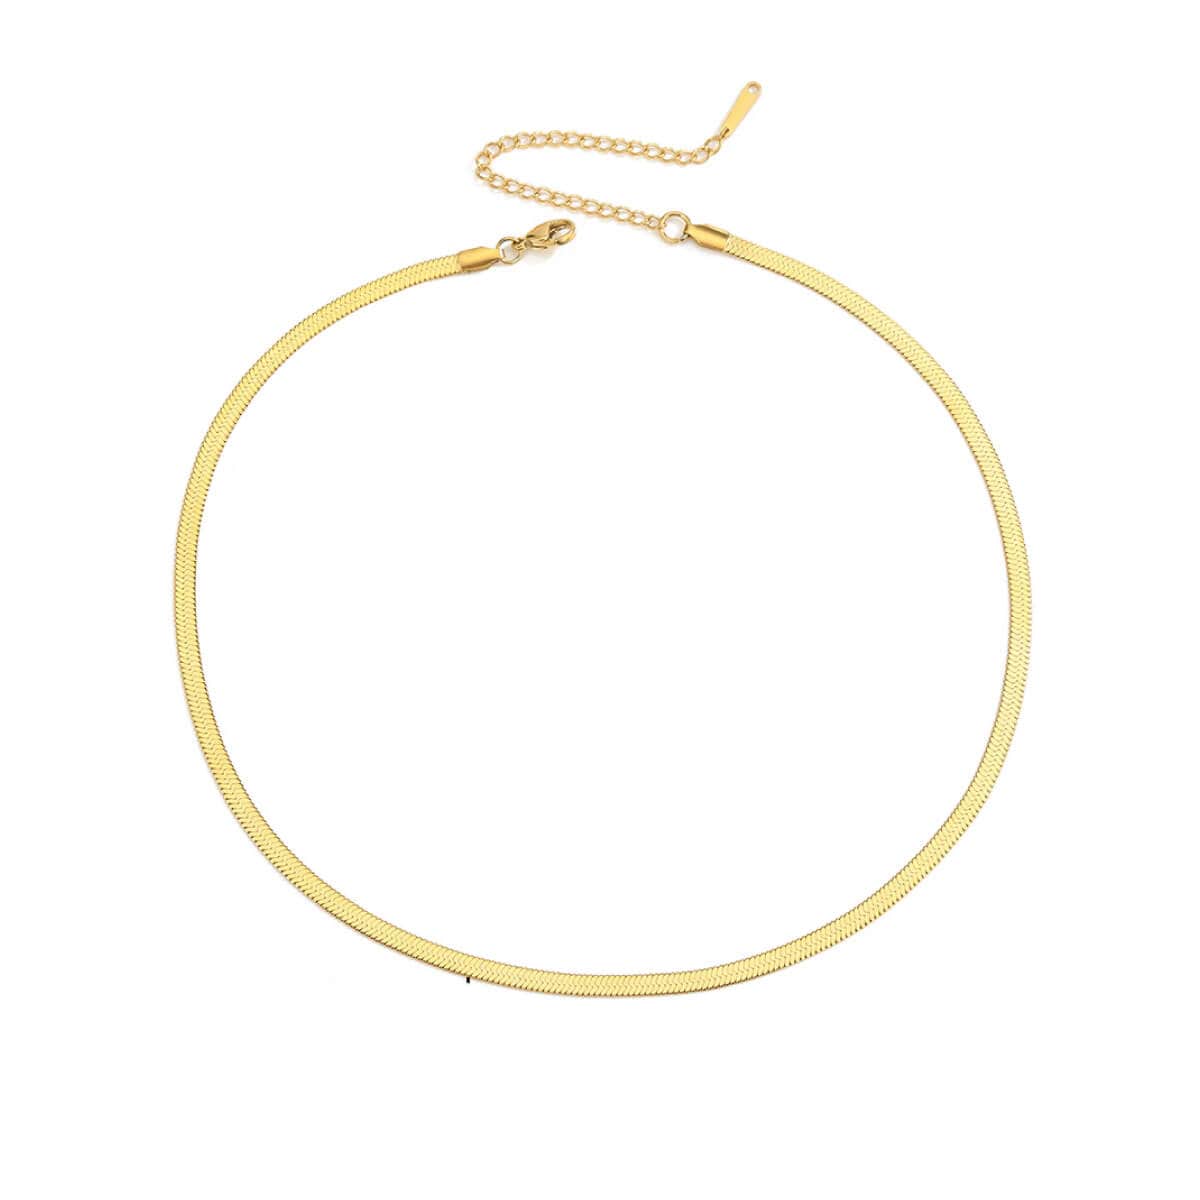 Classic Snake Chain Necklace gold med front | MILK MONEY milkmoney.co | cute necklaces. pretty necklaces. trendy necklaces. cute simple necklaces. cute gold necklace. cute cheap necklaces. cute necklaces for women. trendy layered necklaces. casual necklace. cute trendy necklaces